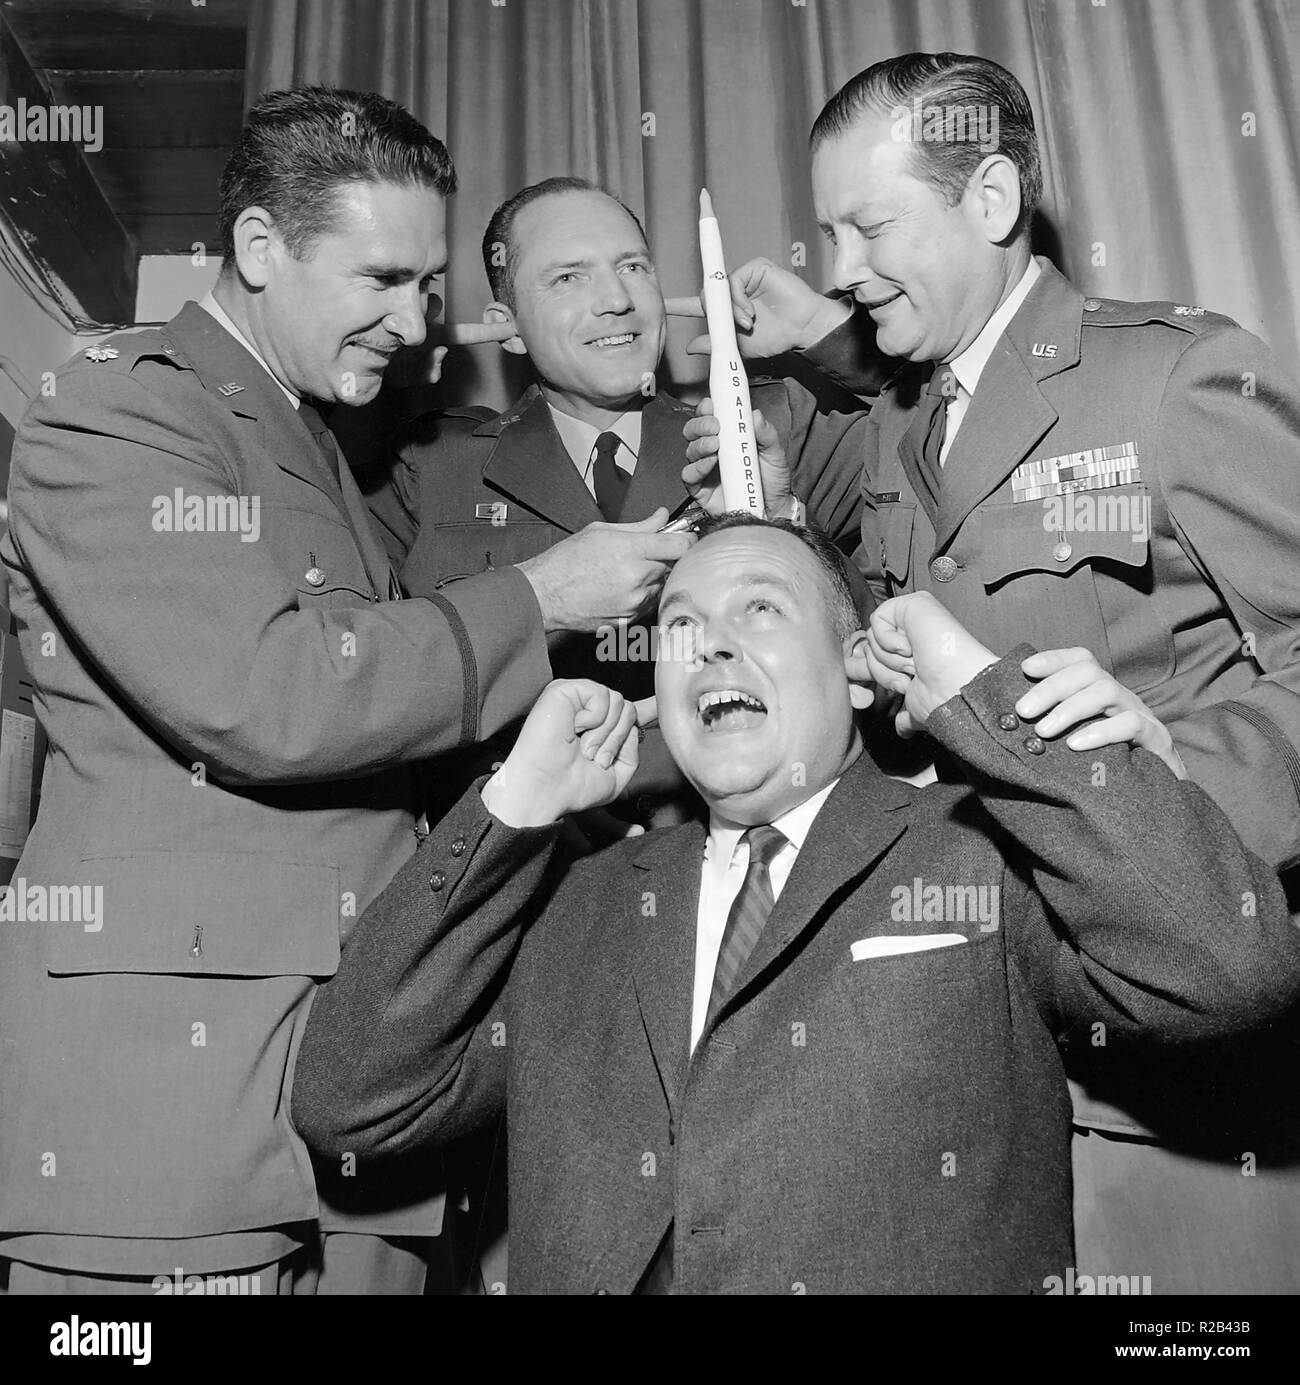 Some U.S. Air Force officers get goofy with a rocket on a man's head, ca. 1960. Stock Photo